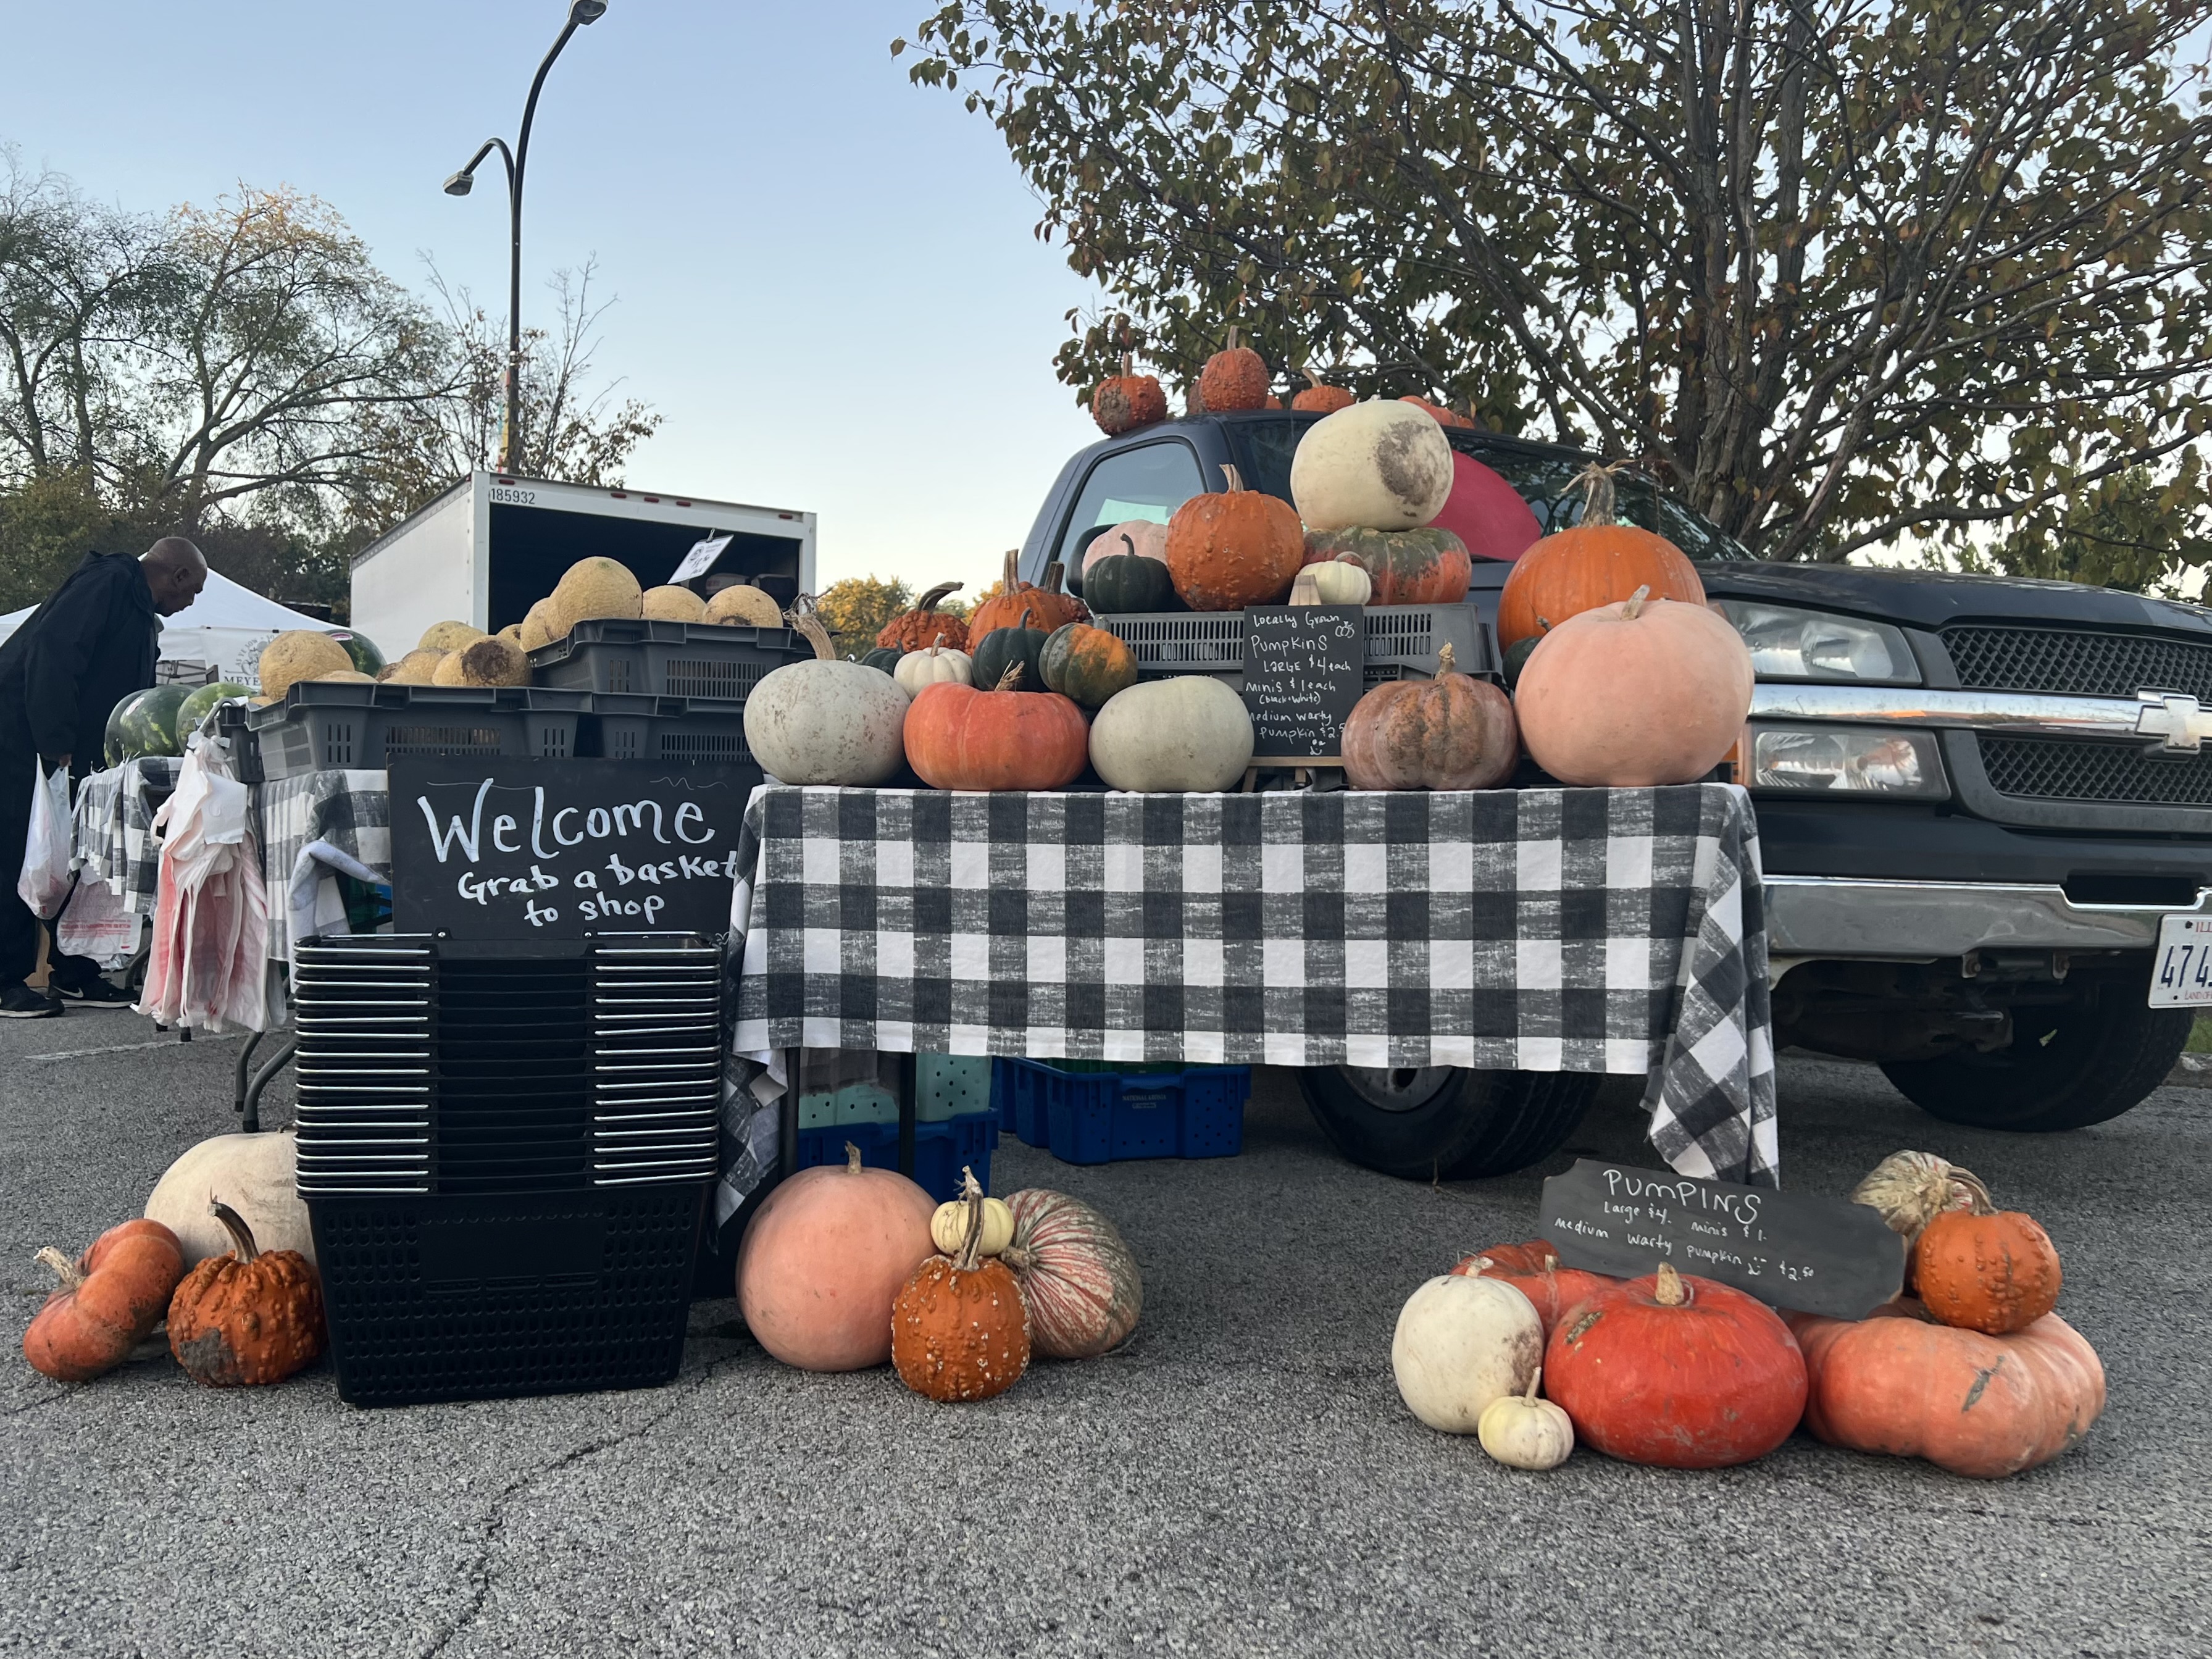 On a table, there is a fall assortment of pumpkins plus black shopping baskets for market shoppers. Photo by Alyssa Buckley.